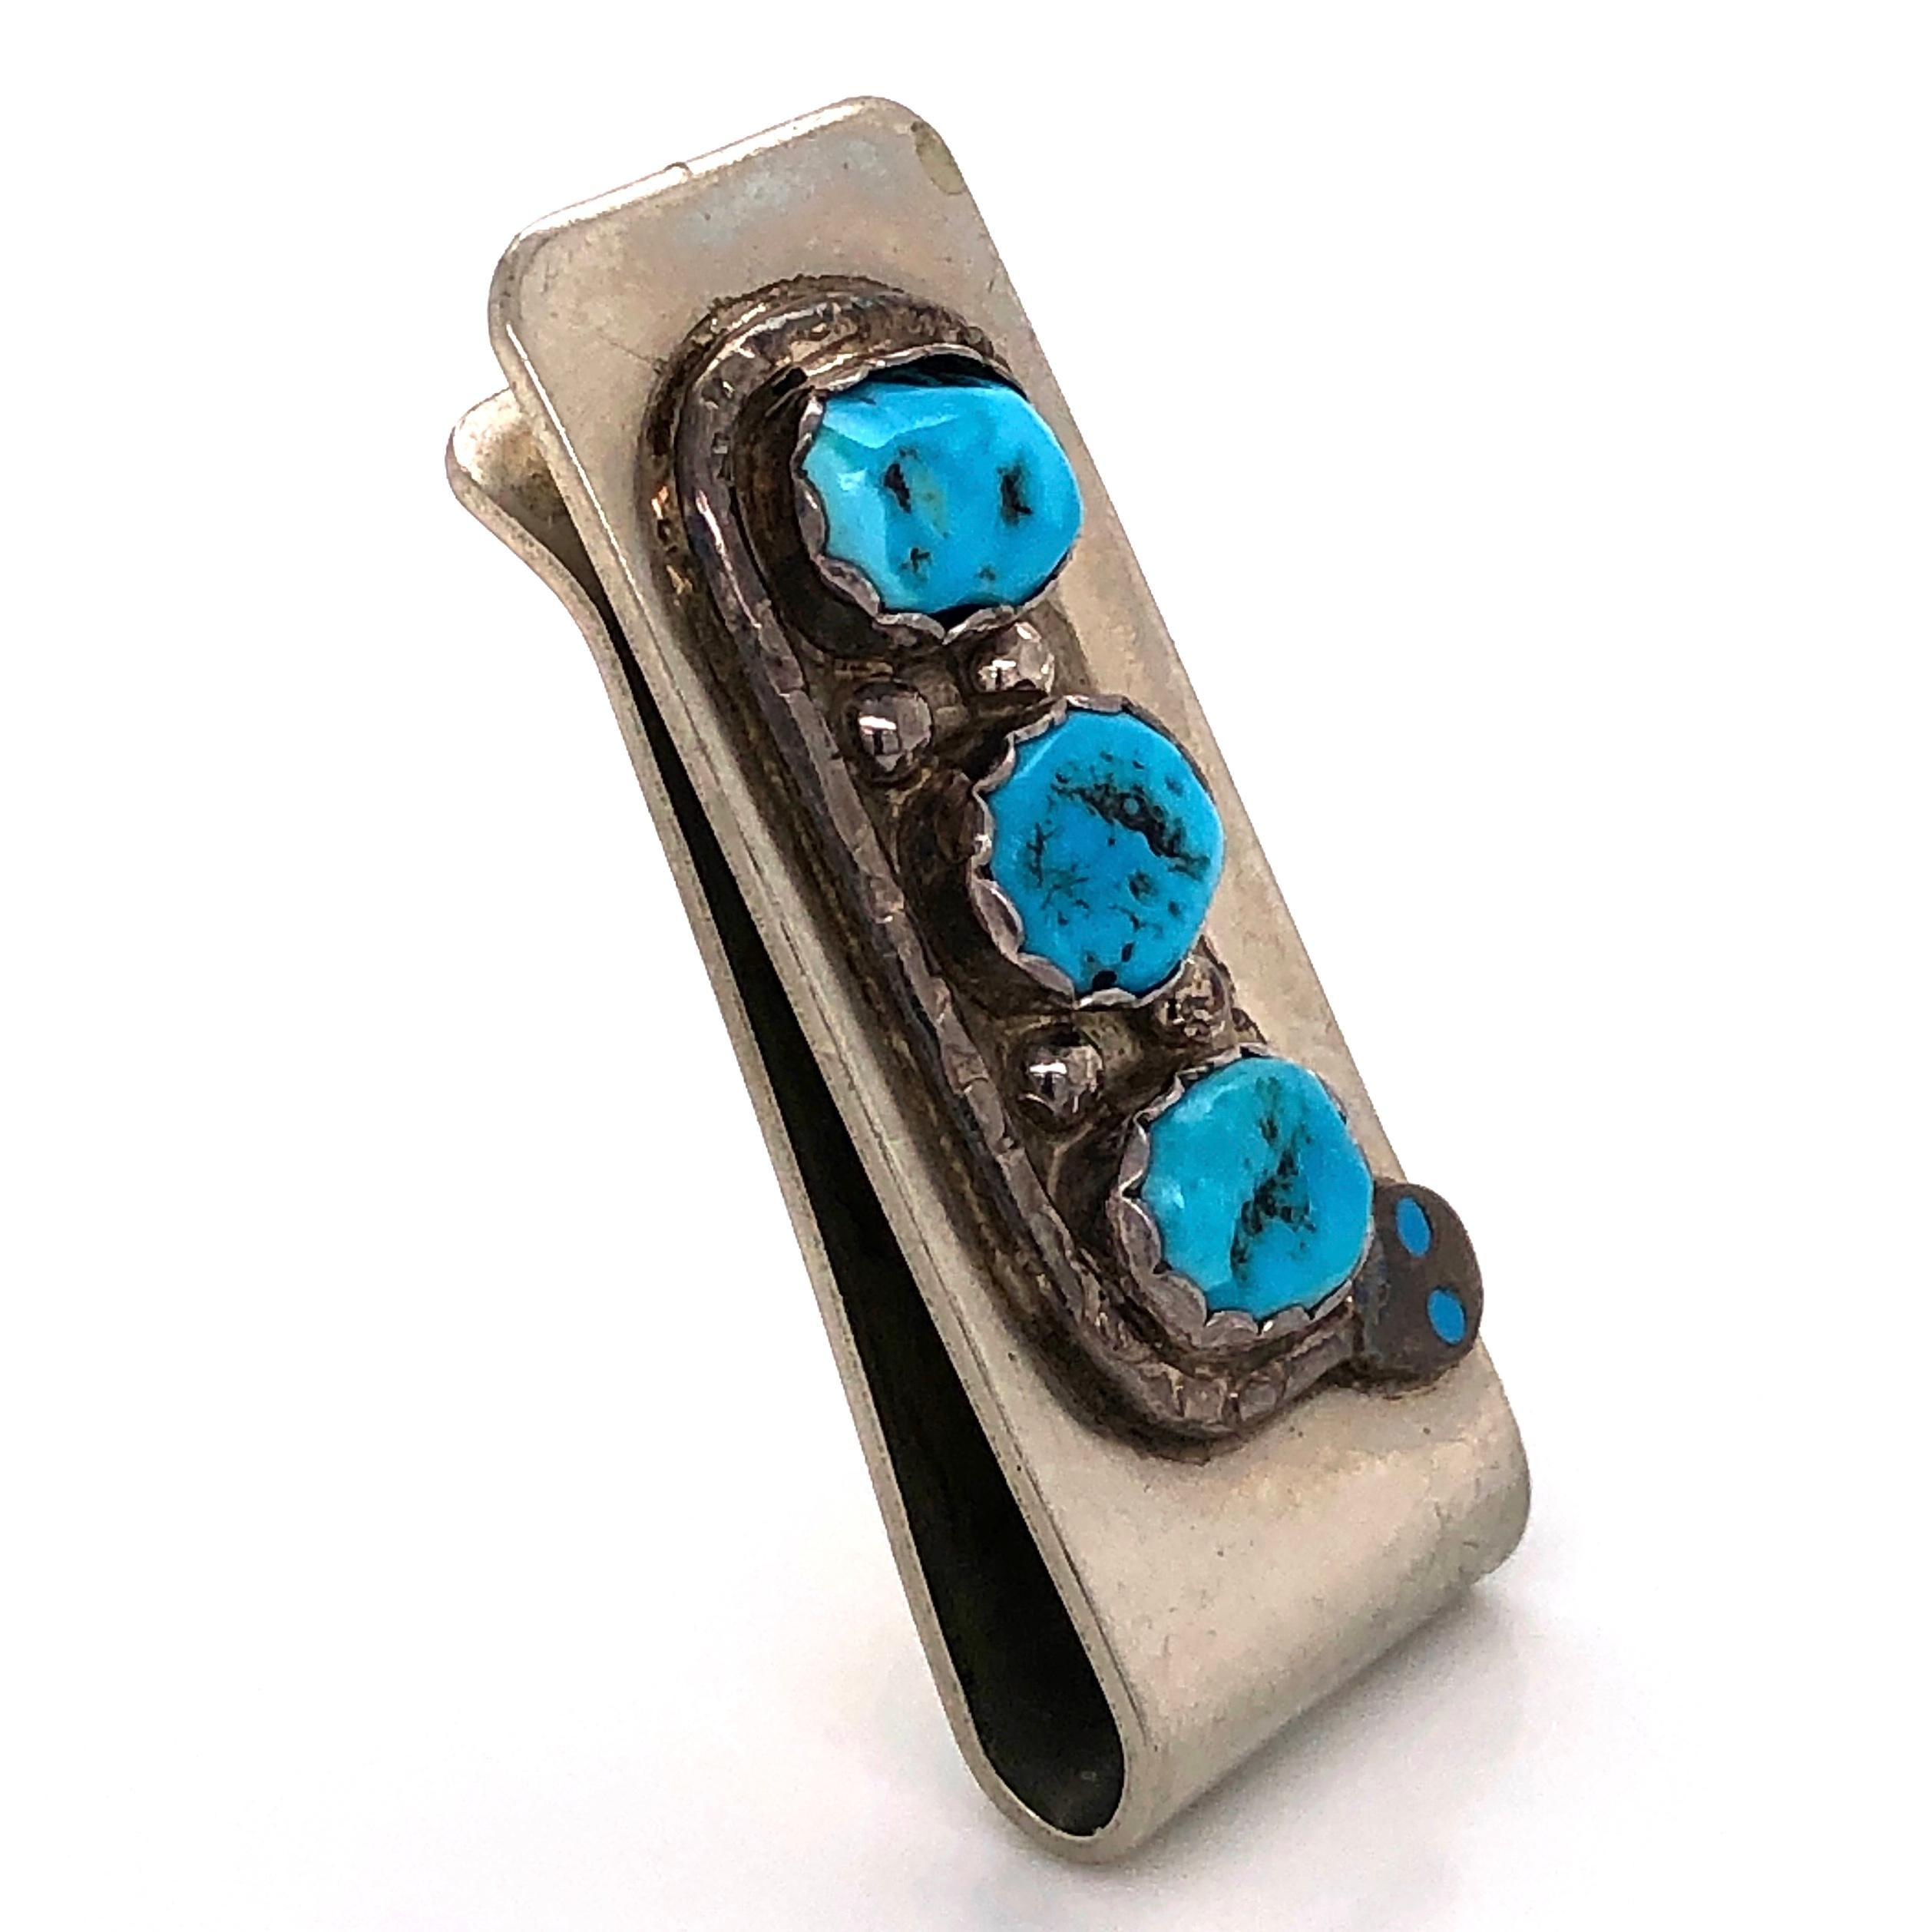 Native ZUNI Old Pawn Serpent design Sterling Silver Money Clip set with 3 Turquoise. A perfect combination of functionality and modern elegance. Approx. 1.75” x 0.75